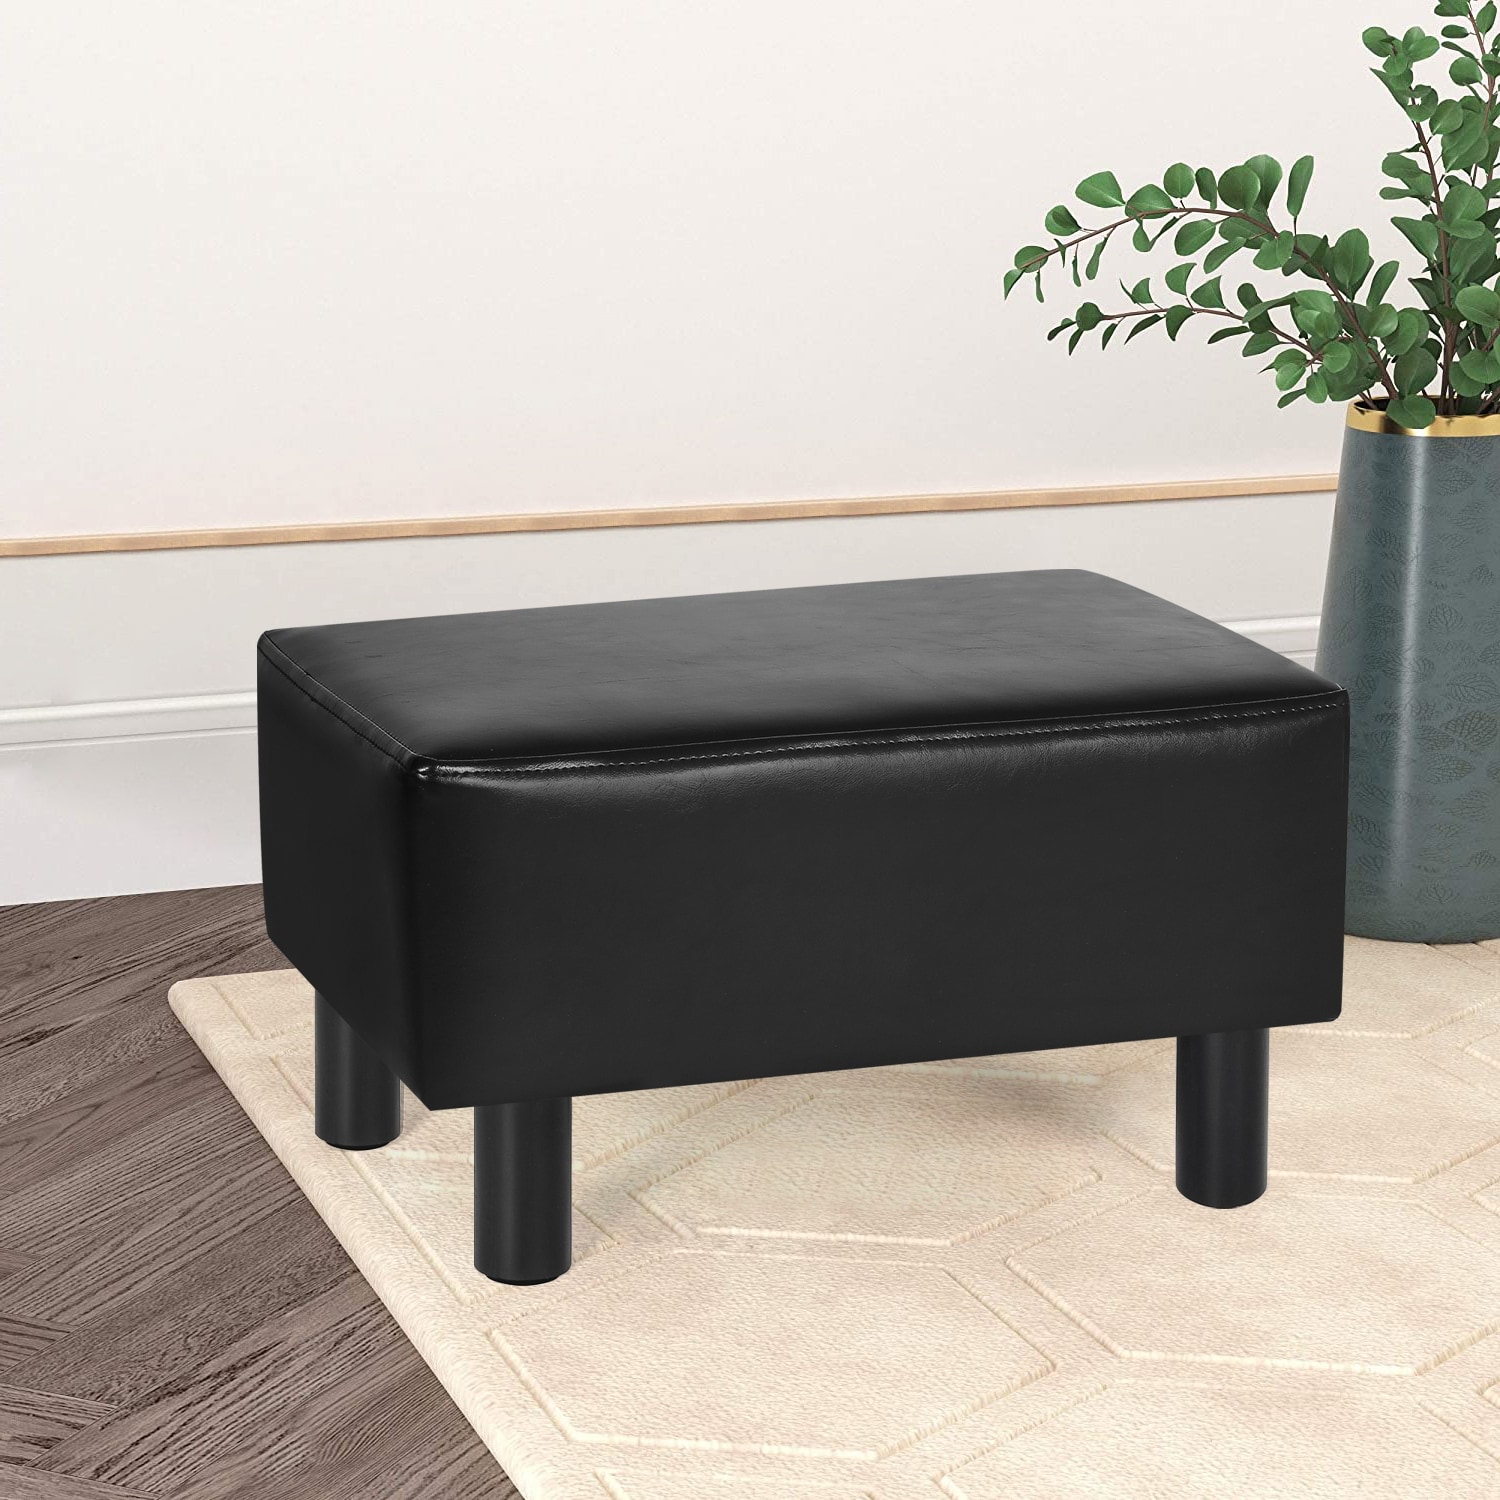 https://ak1.ostkcdn.com/images/products/is/images/direct/3800d170ecaf2d9db1e180ec129cf2d3719cc8c5/Adeco-Footstool-Ottoman-Faux-Leather-Foot-Rest-Stool.jpg